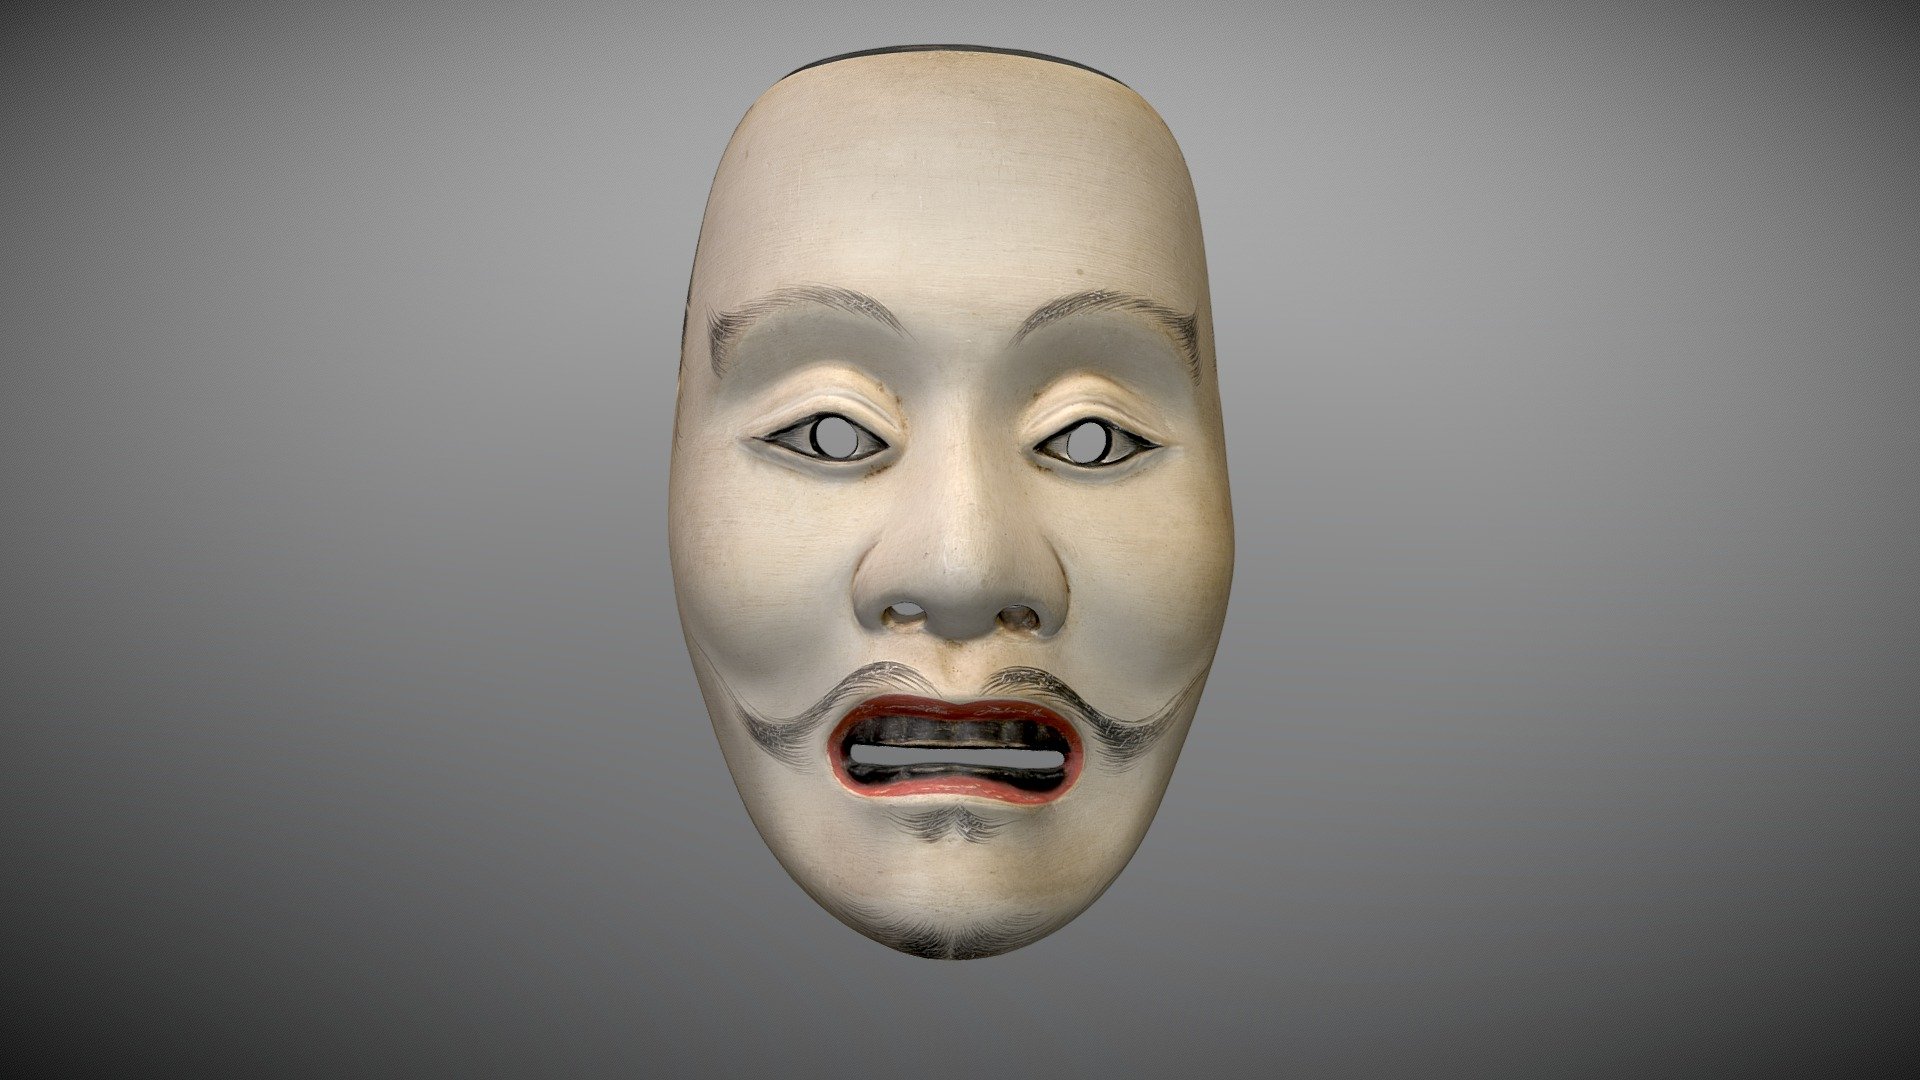 This mask is used in the Noh play entitled Hagoromo (羽衣) by Katayama Kuroemon X of the Kanze (観世) school of Noh.

It was scanned in 2017 for the NOxAR exhibition at Rohm Theater in Kyoto, Japan by KYOTO VR, as part of Kyoto Project, a collaboration between Kyoto City, the Japanese Ministry of Culture to blend technology with Japanese traditional arts 3d model